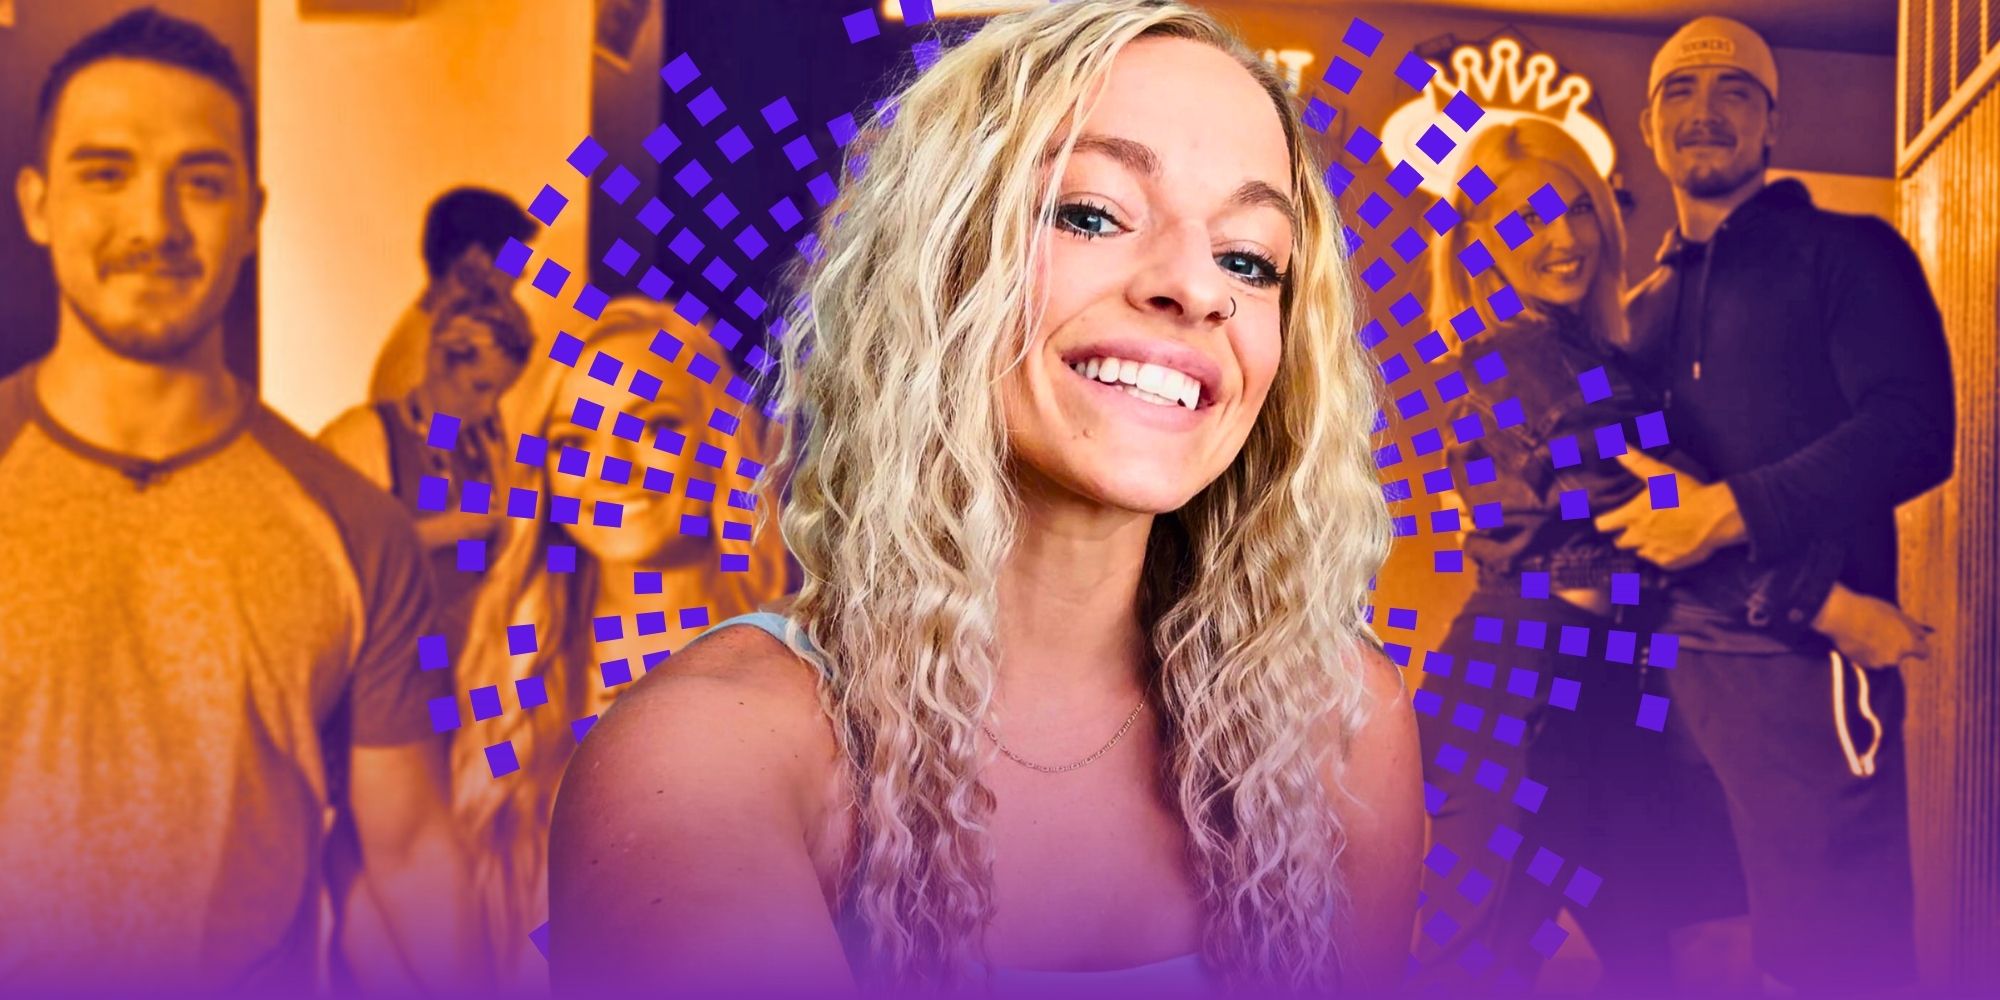 Mackenzie McKee from Teen Mom centered and smiling in front of purple and orange background featuring images of Mackenzie with ex-husband Josh